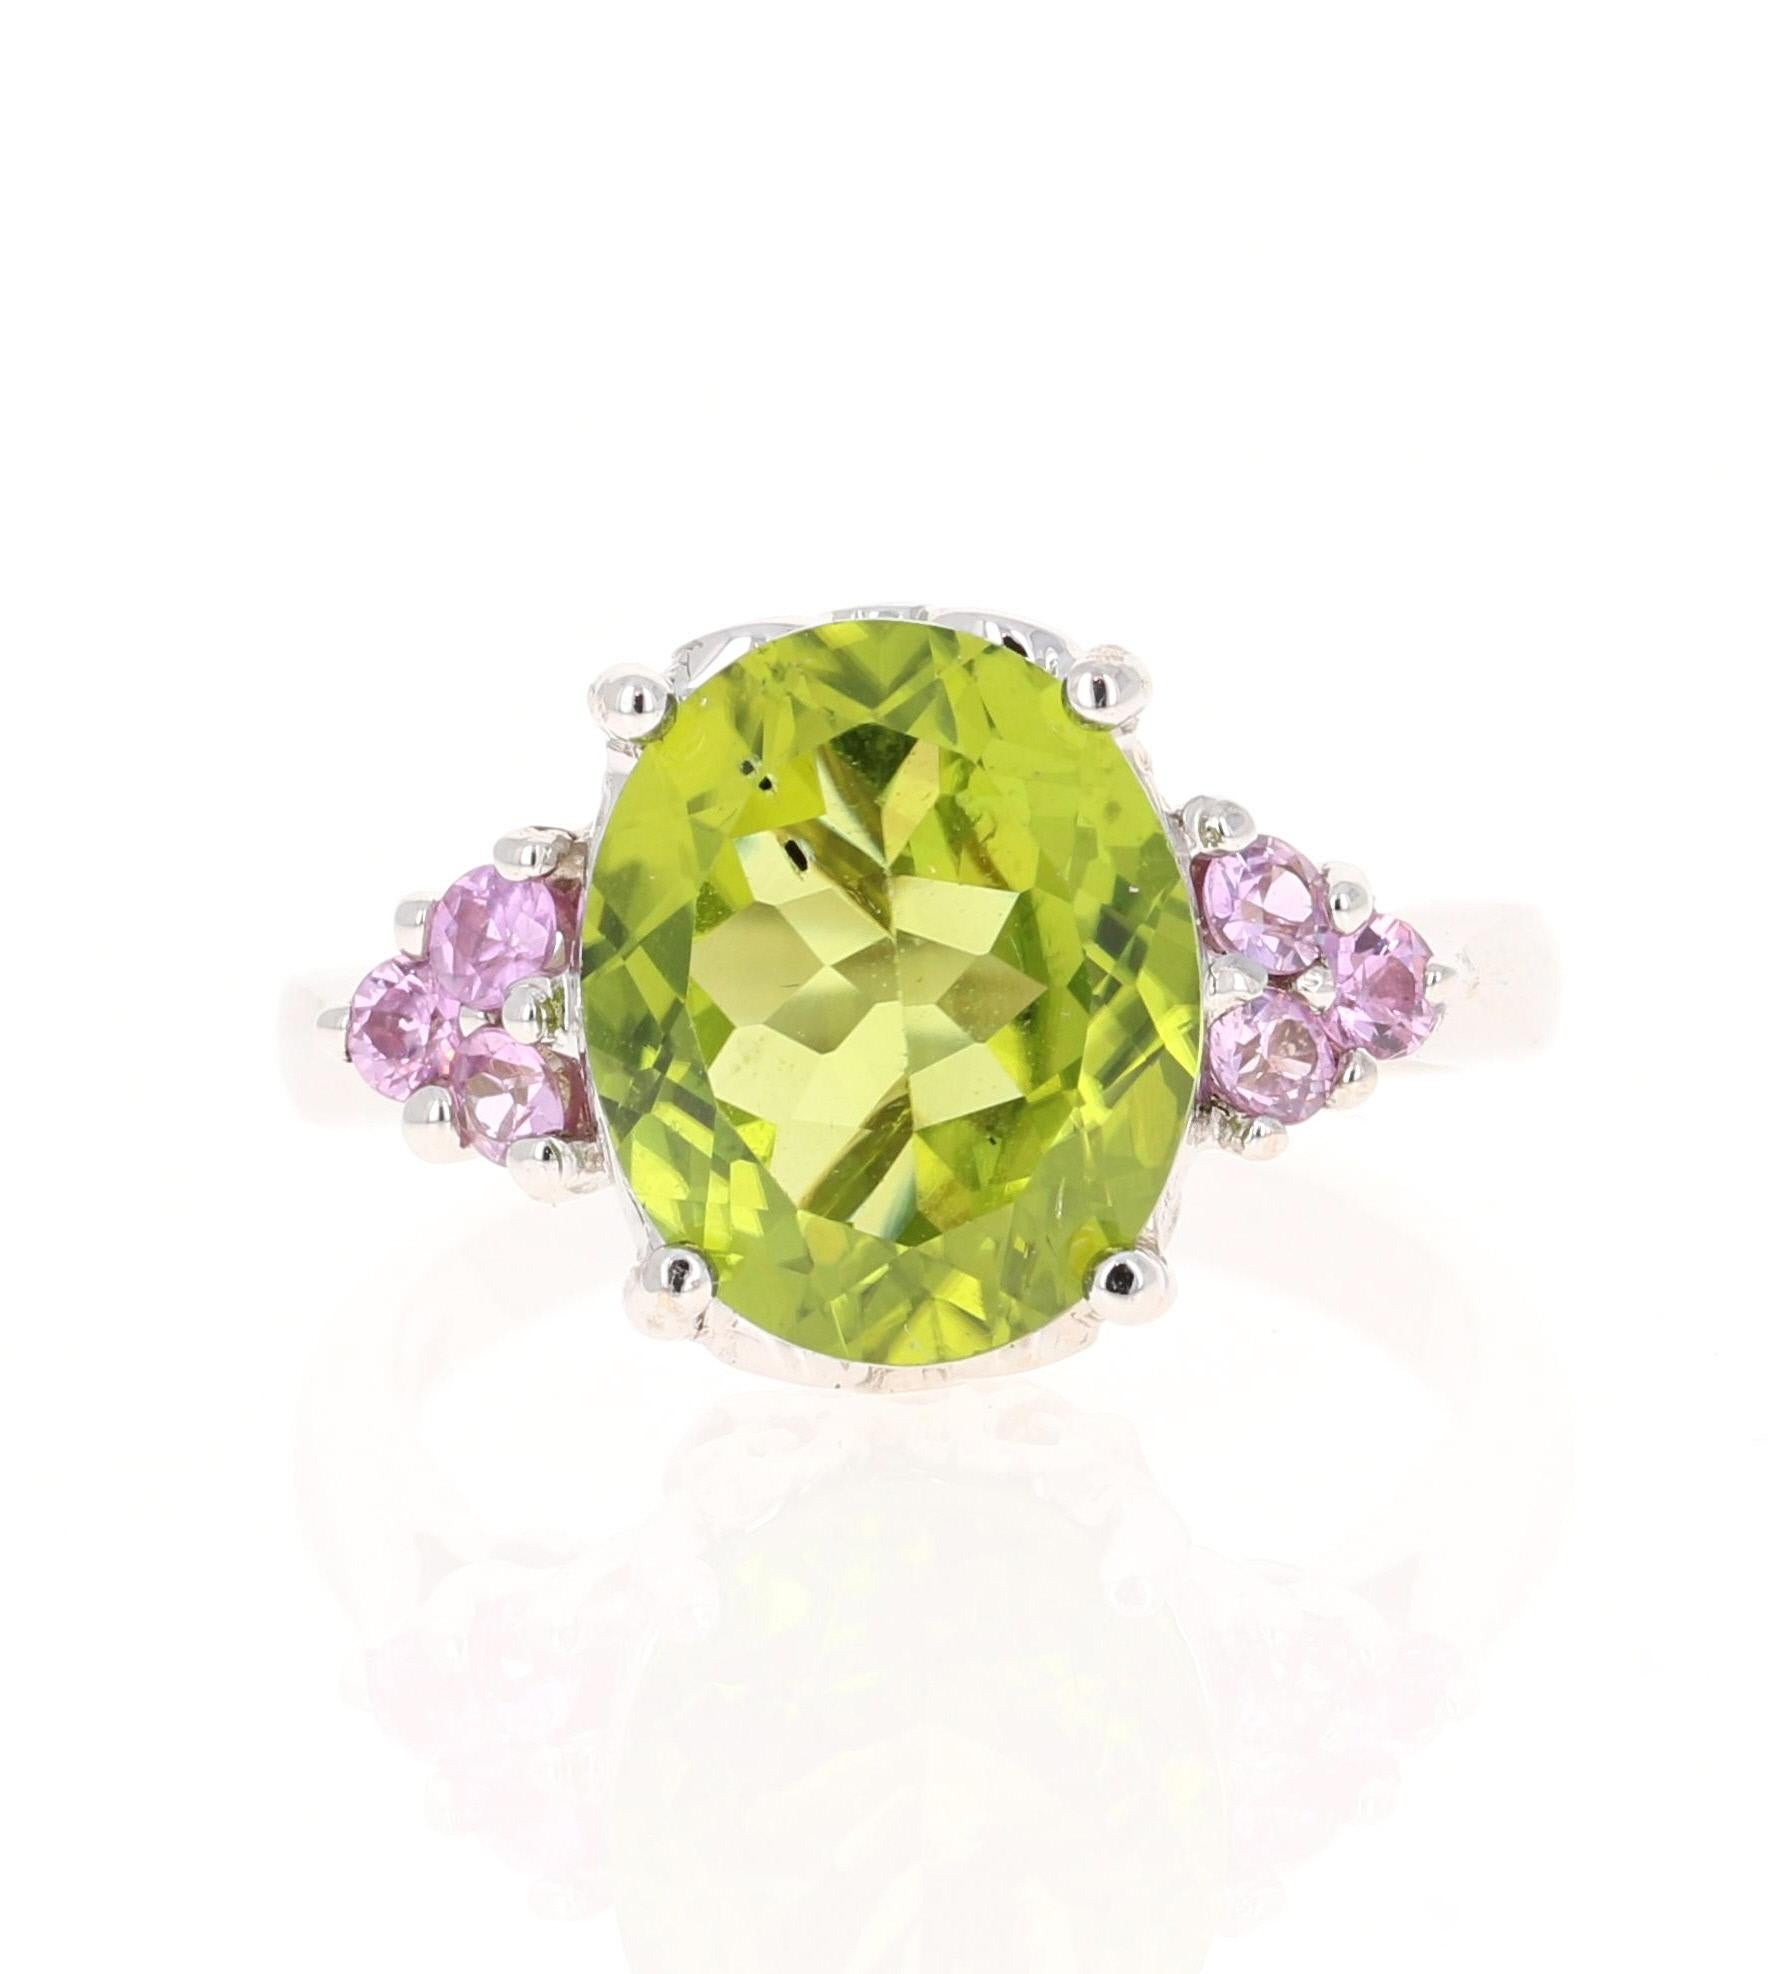 This beautiful ring has an Oval Cut Peridot that weighs 4.88 Carats. The ring is surrounded by 6 Pink Sapphires that weigh 0.37 Carats. The total carat weight of this ring is 5.25 Carats. 

Curated in 14 Karat White Gold and weighs approximately 5.2